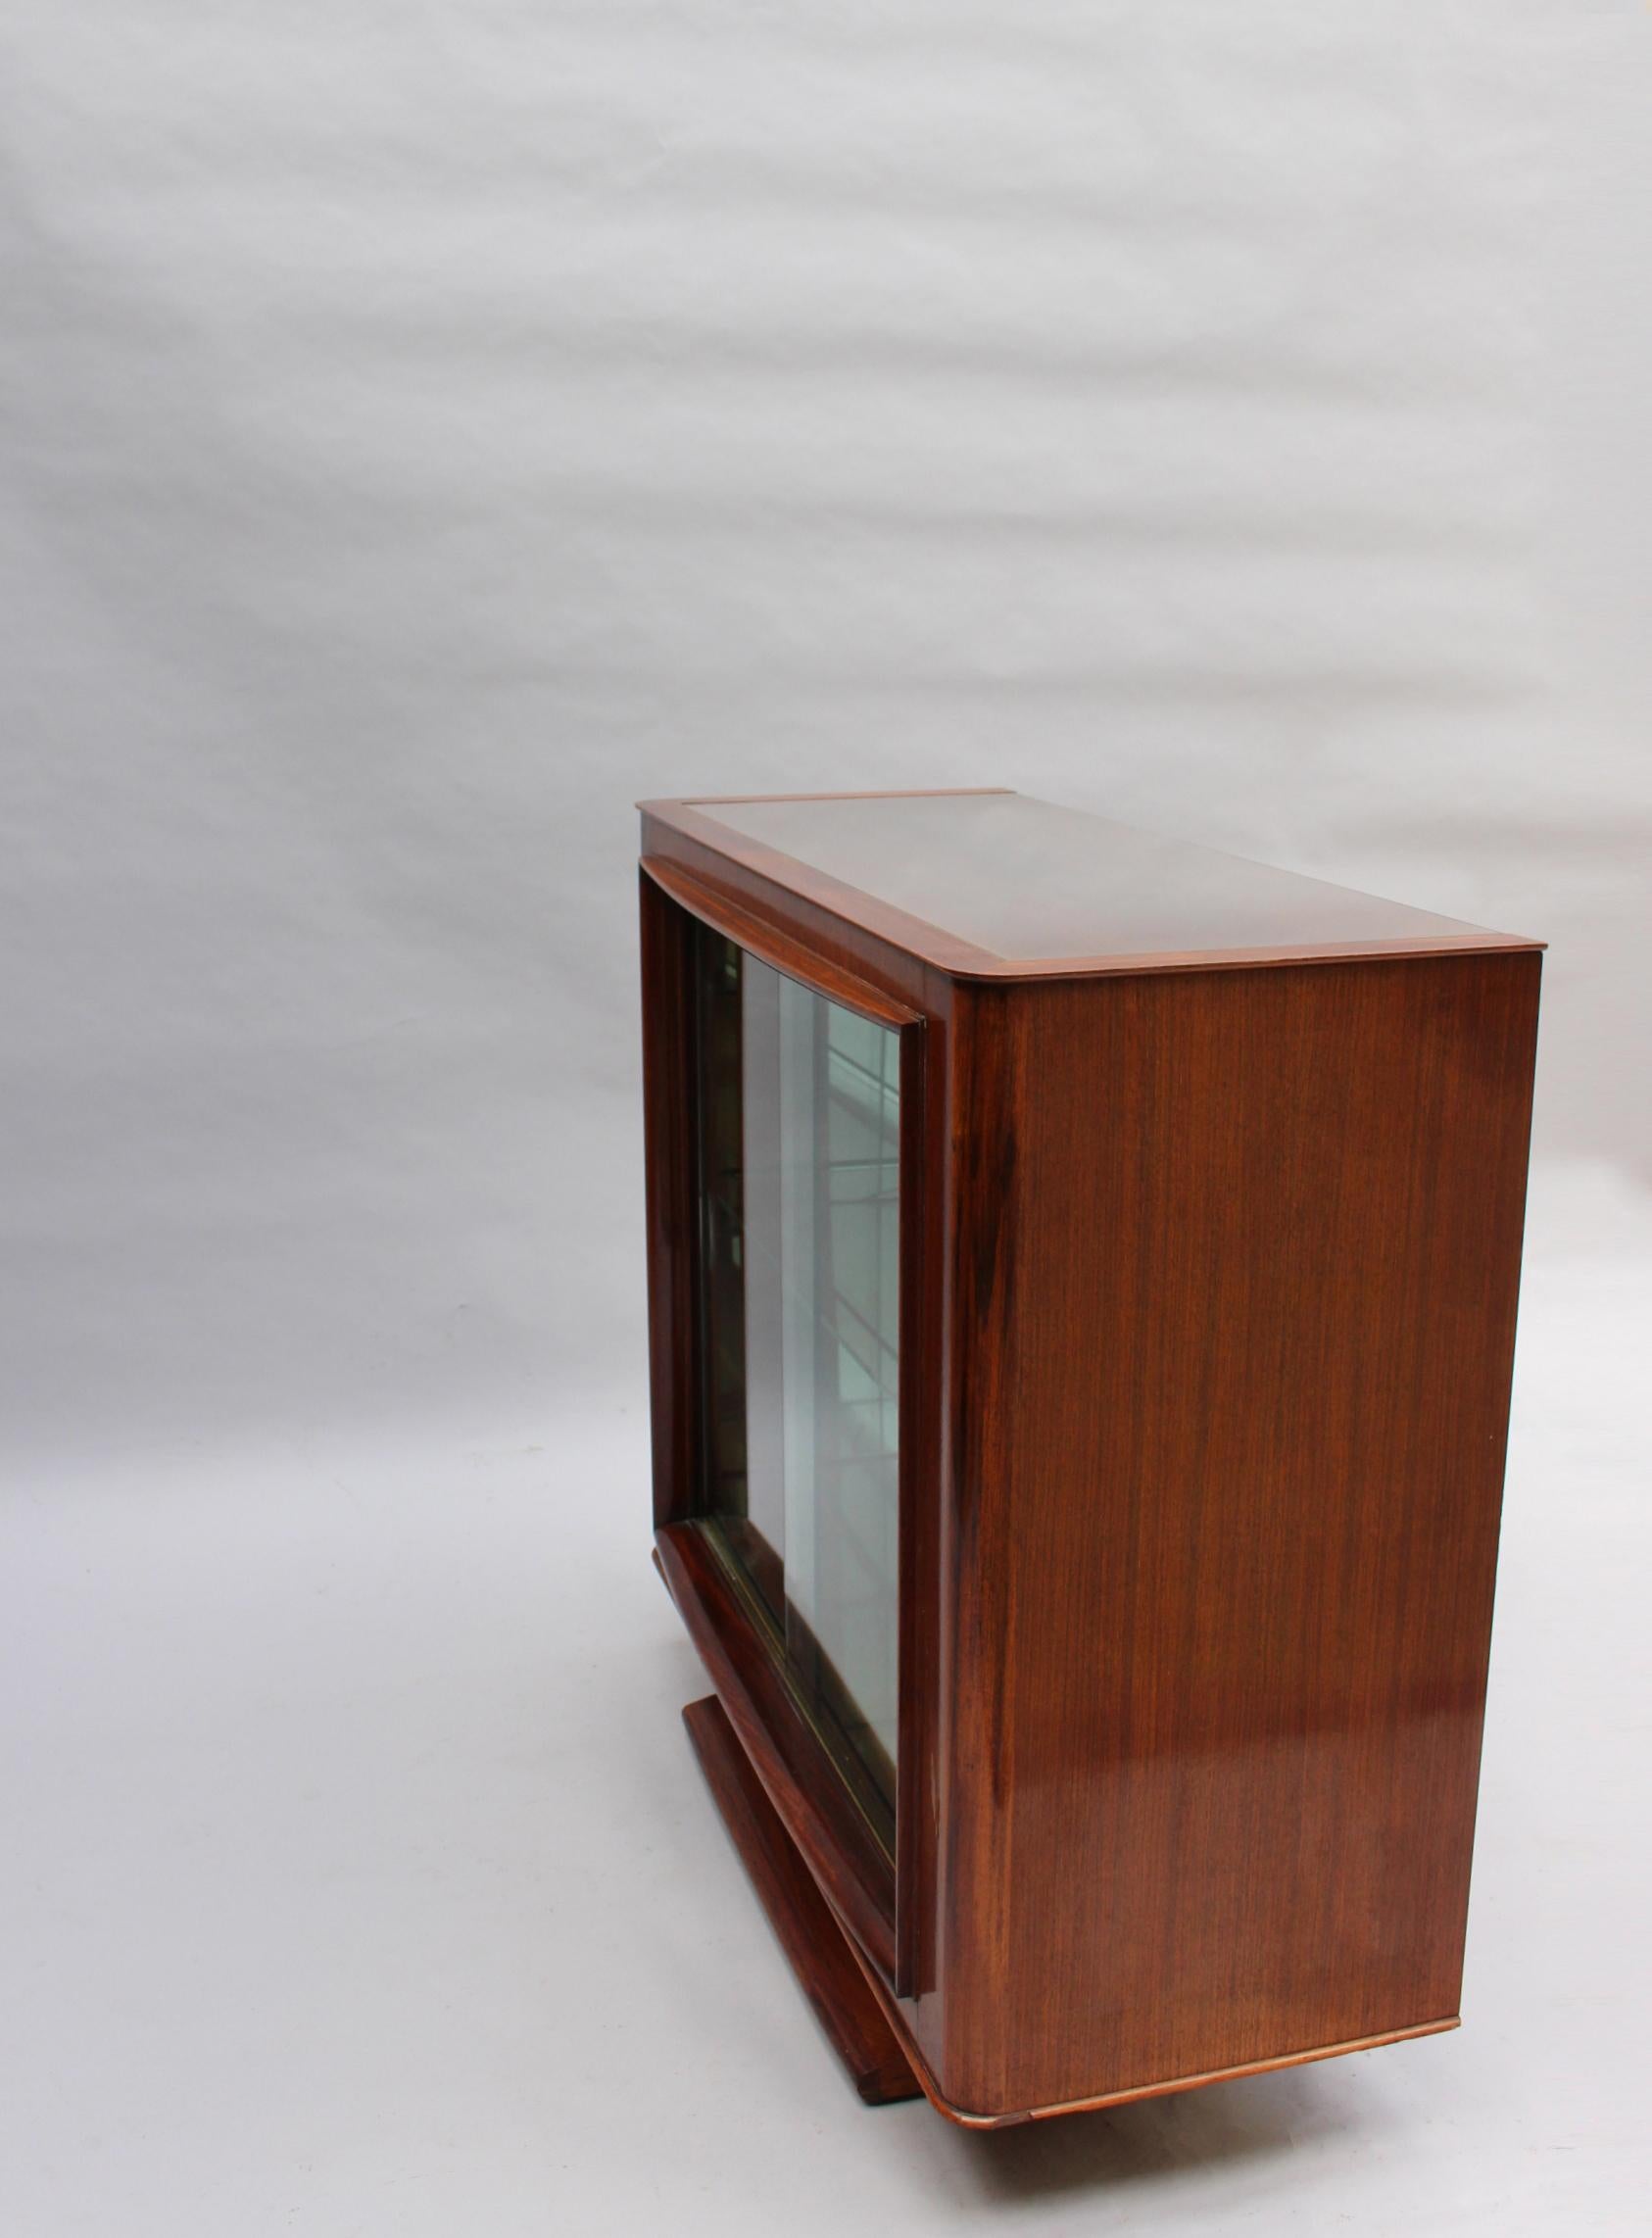 Fine French Art Deco Rosewood Vitrine or Bar by Maxime Old In Fair Condition For Sale In Long Island City, NY